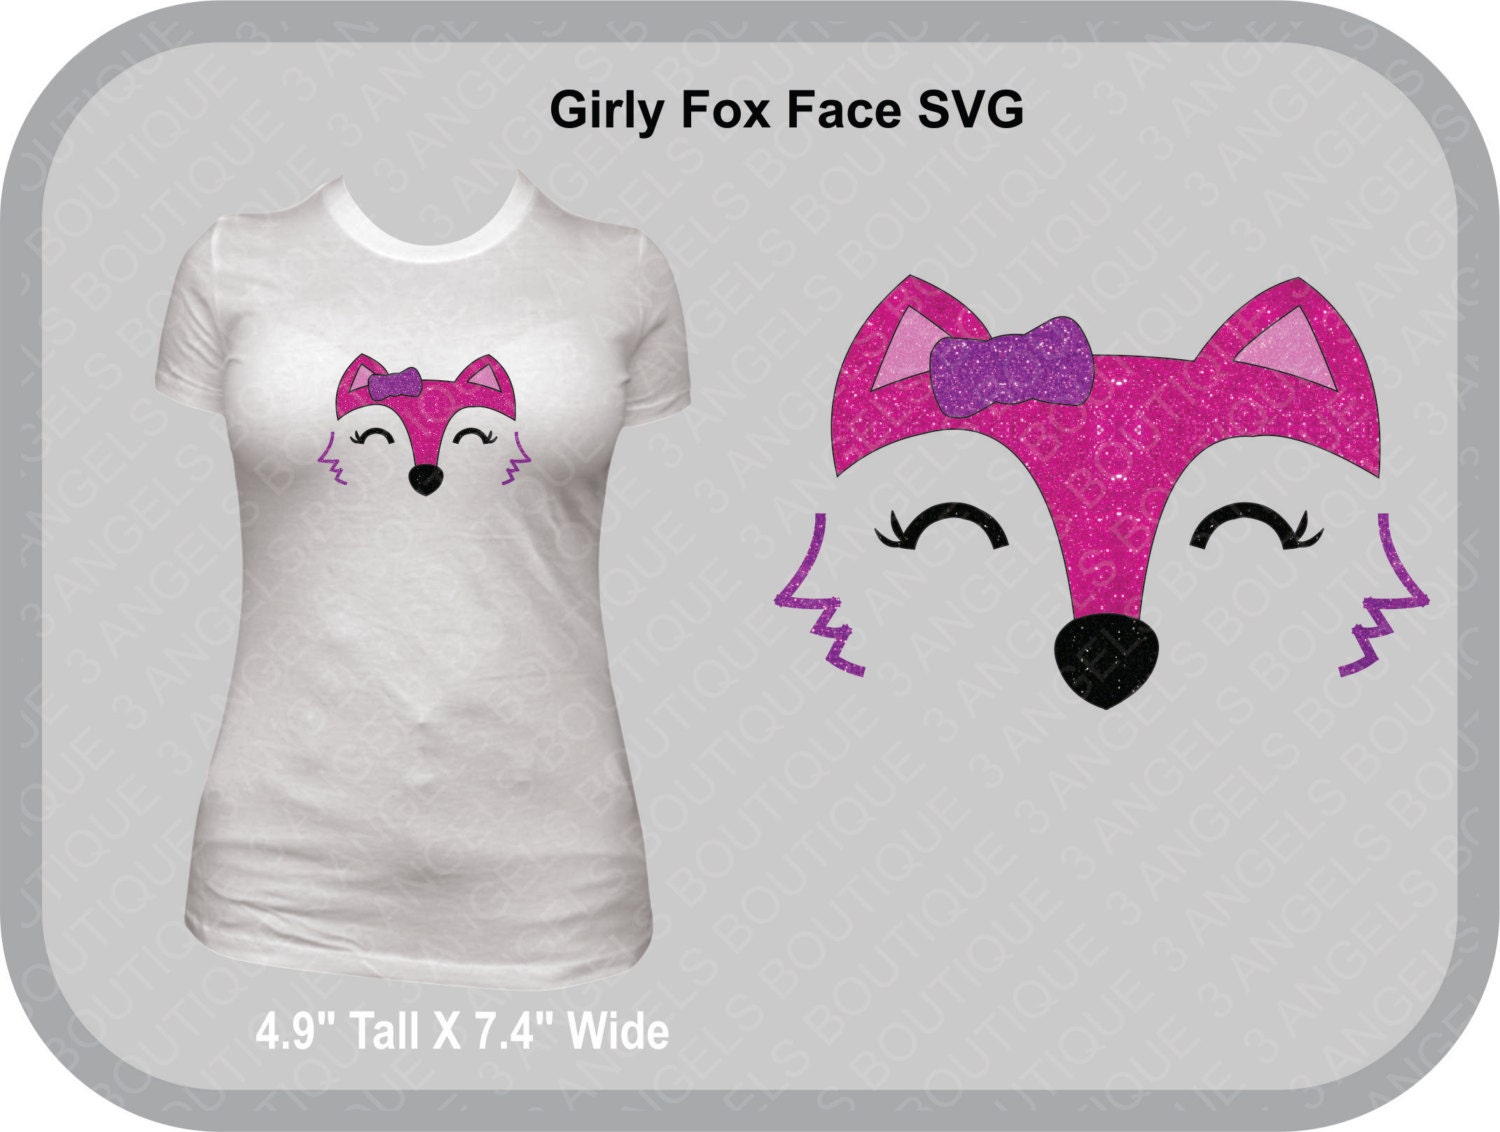 Download Girly Fox Face SVG Cutter Design INSTANT DOWNLOAD